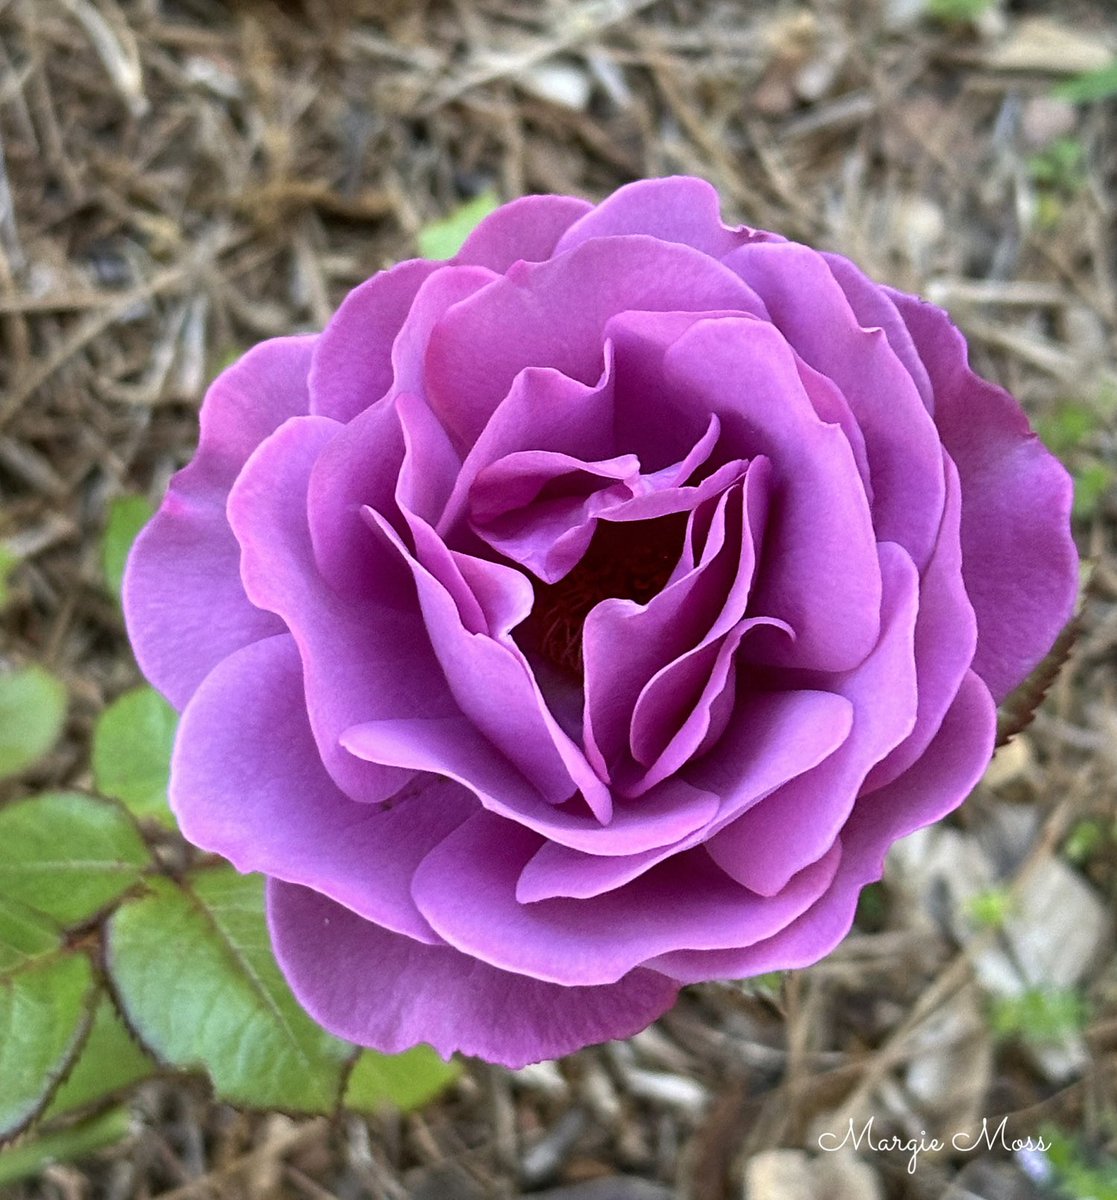 Good morning, everyone. It’s #MagentaMonday so the honor goes to Plum Perfect rose. It’s a beautiful morning here and there is more planting to do. I transplanted Teasing Georgia from a 50 gallon pot to the ground. I don’t recommend it, but now she has an arch to climb. Have a